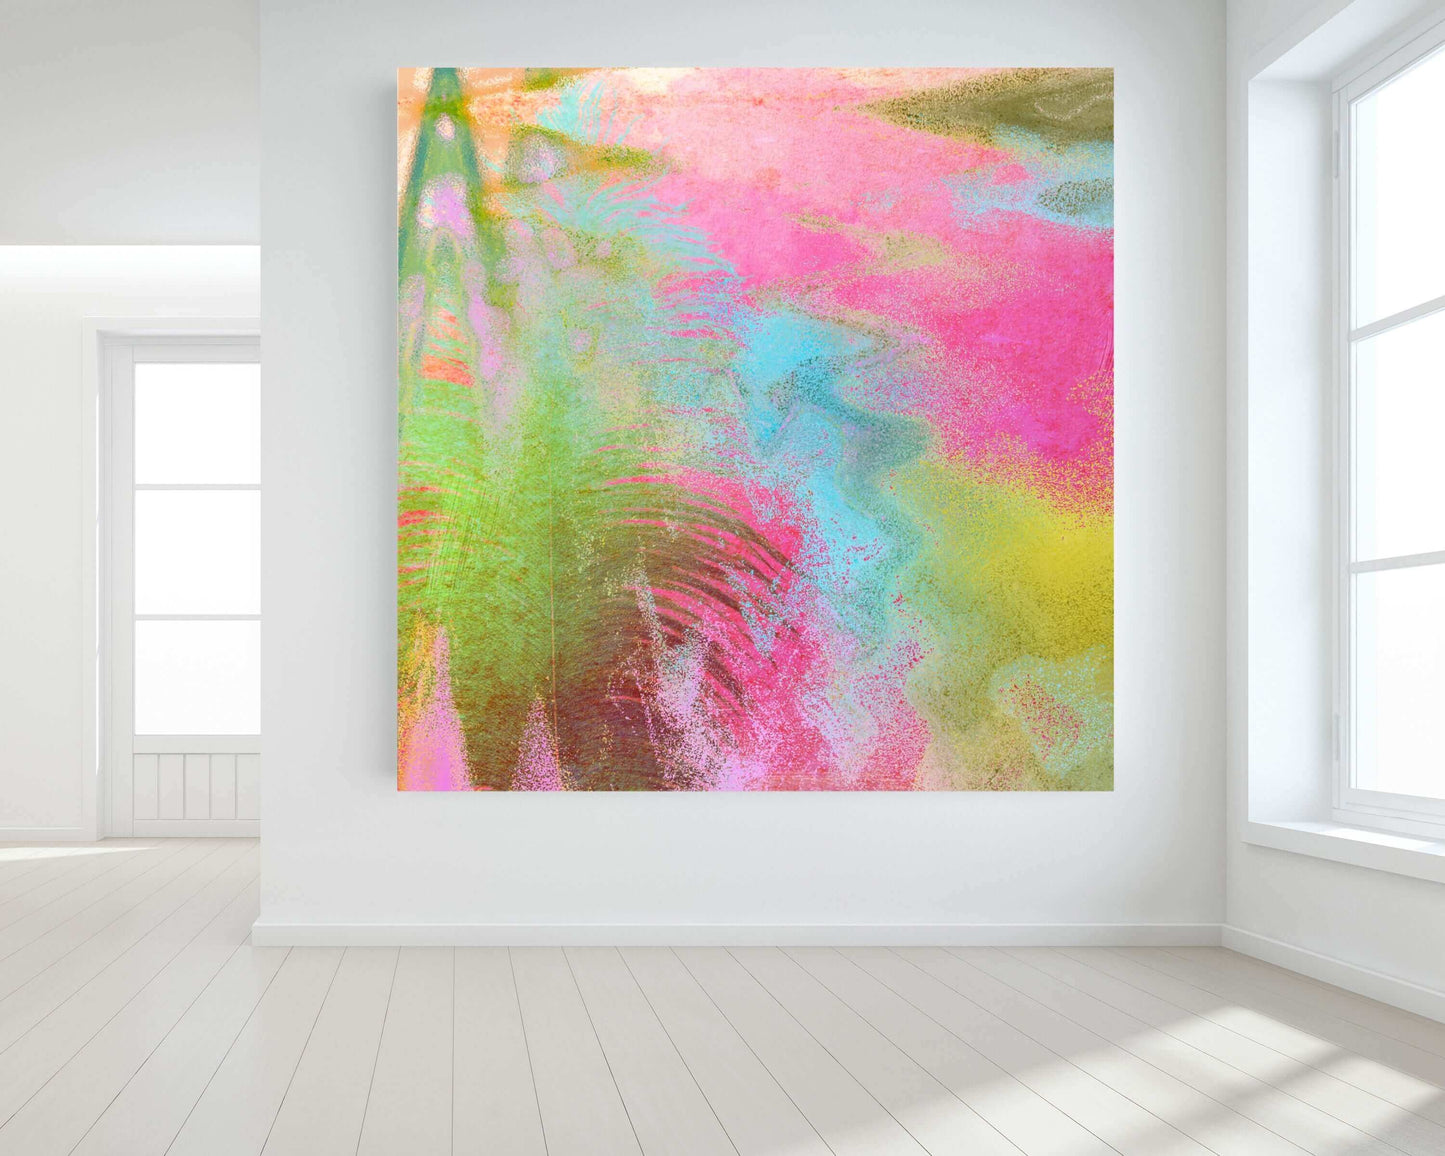 Pastel Tropical Storms “Miami Storms” Abstract Art Canvas Print Wall Art Large Canvas on Wall